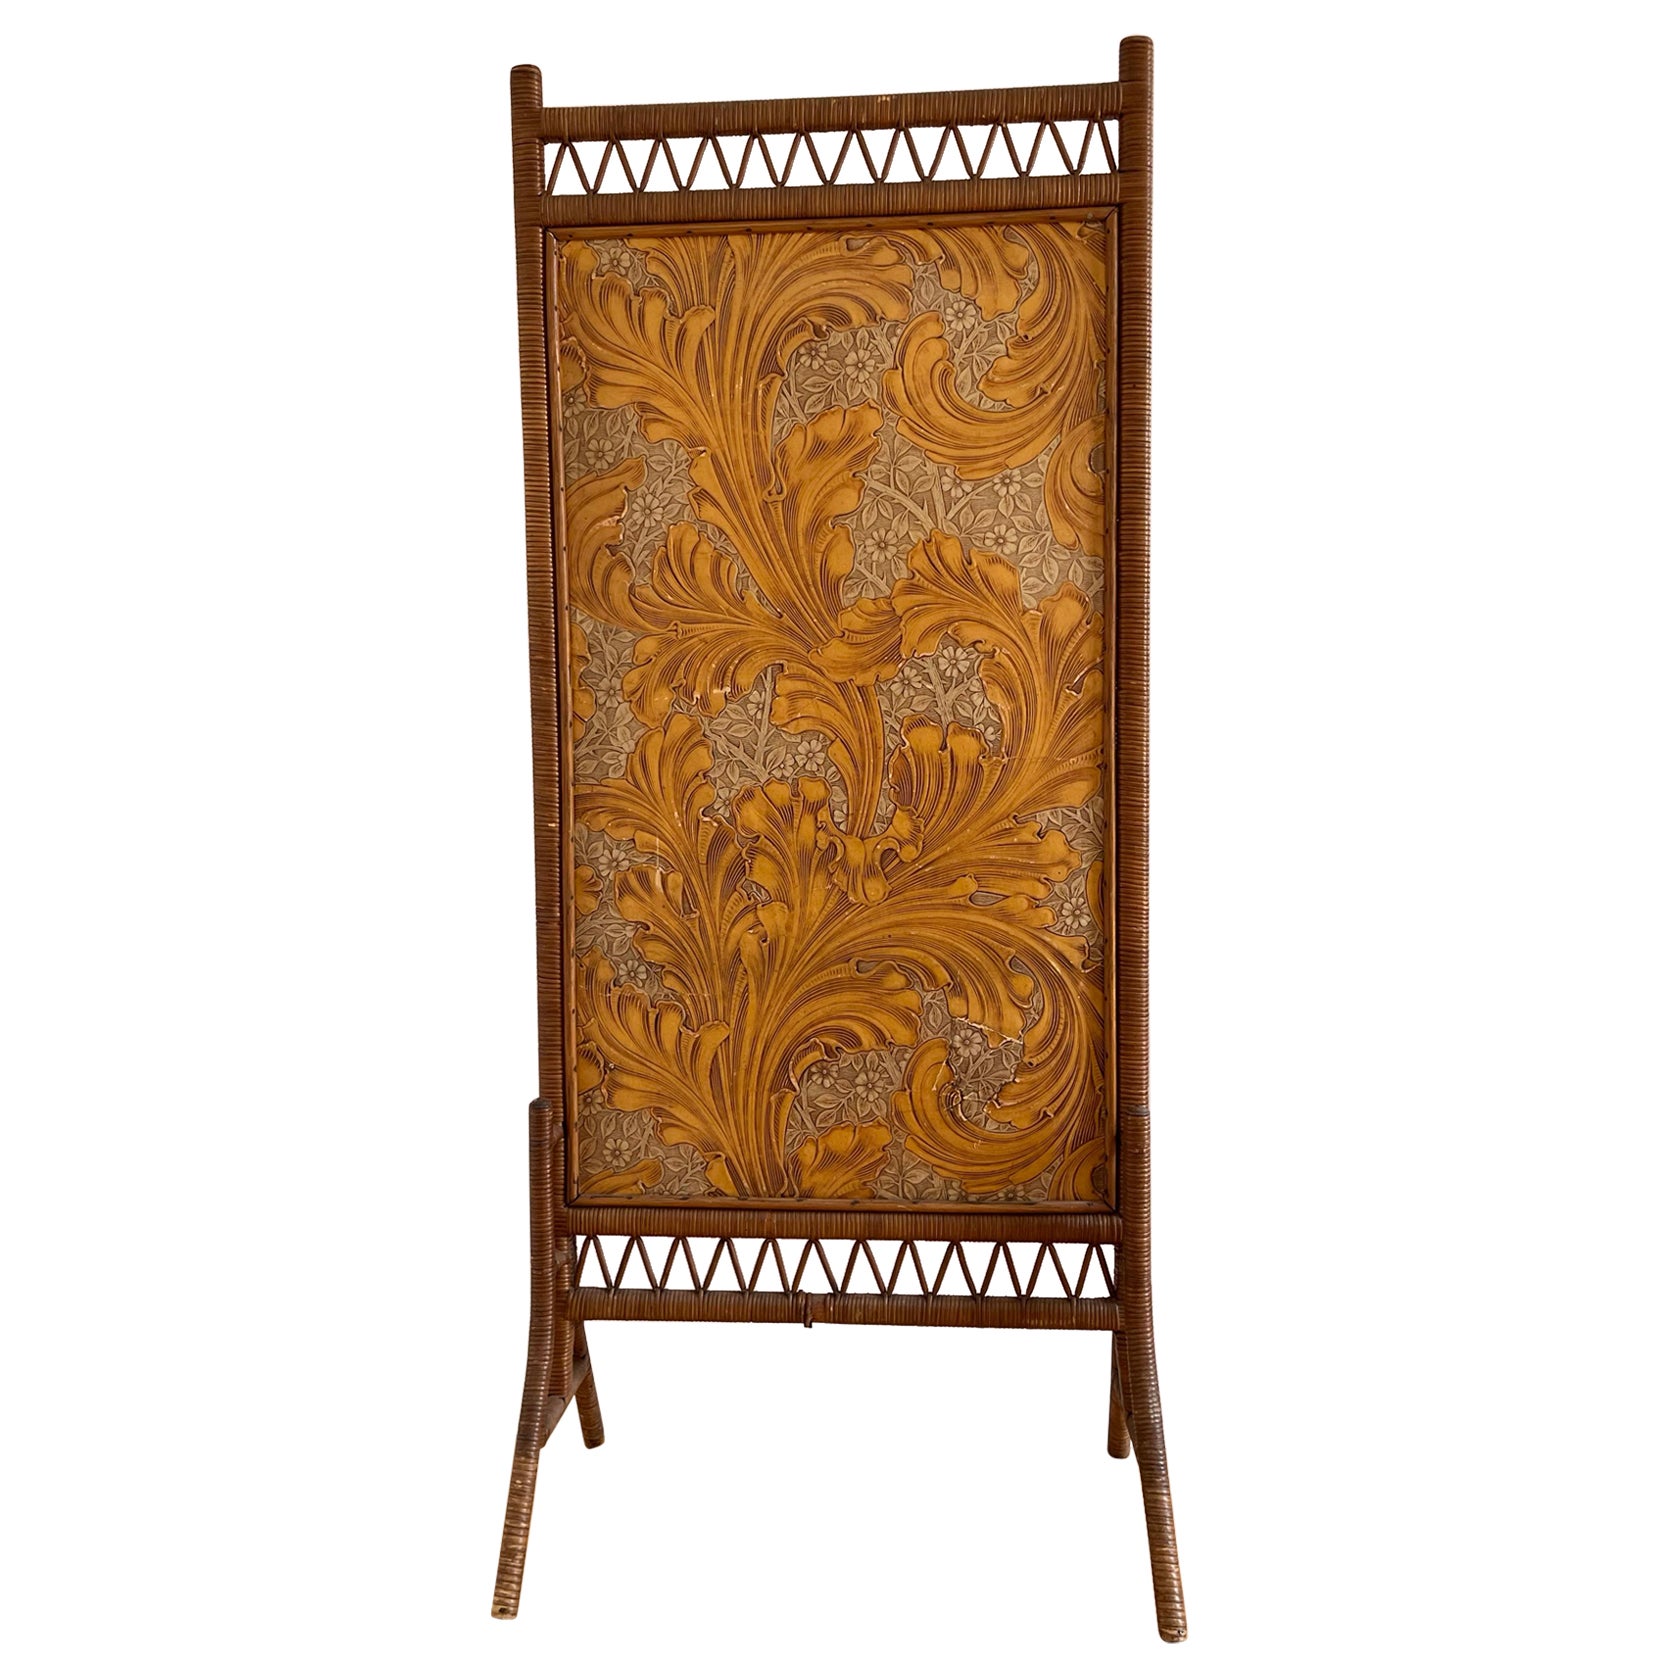 French 1930s/1940s art deco screen in bamboo, rattan and wood